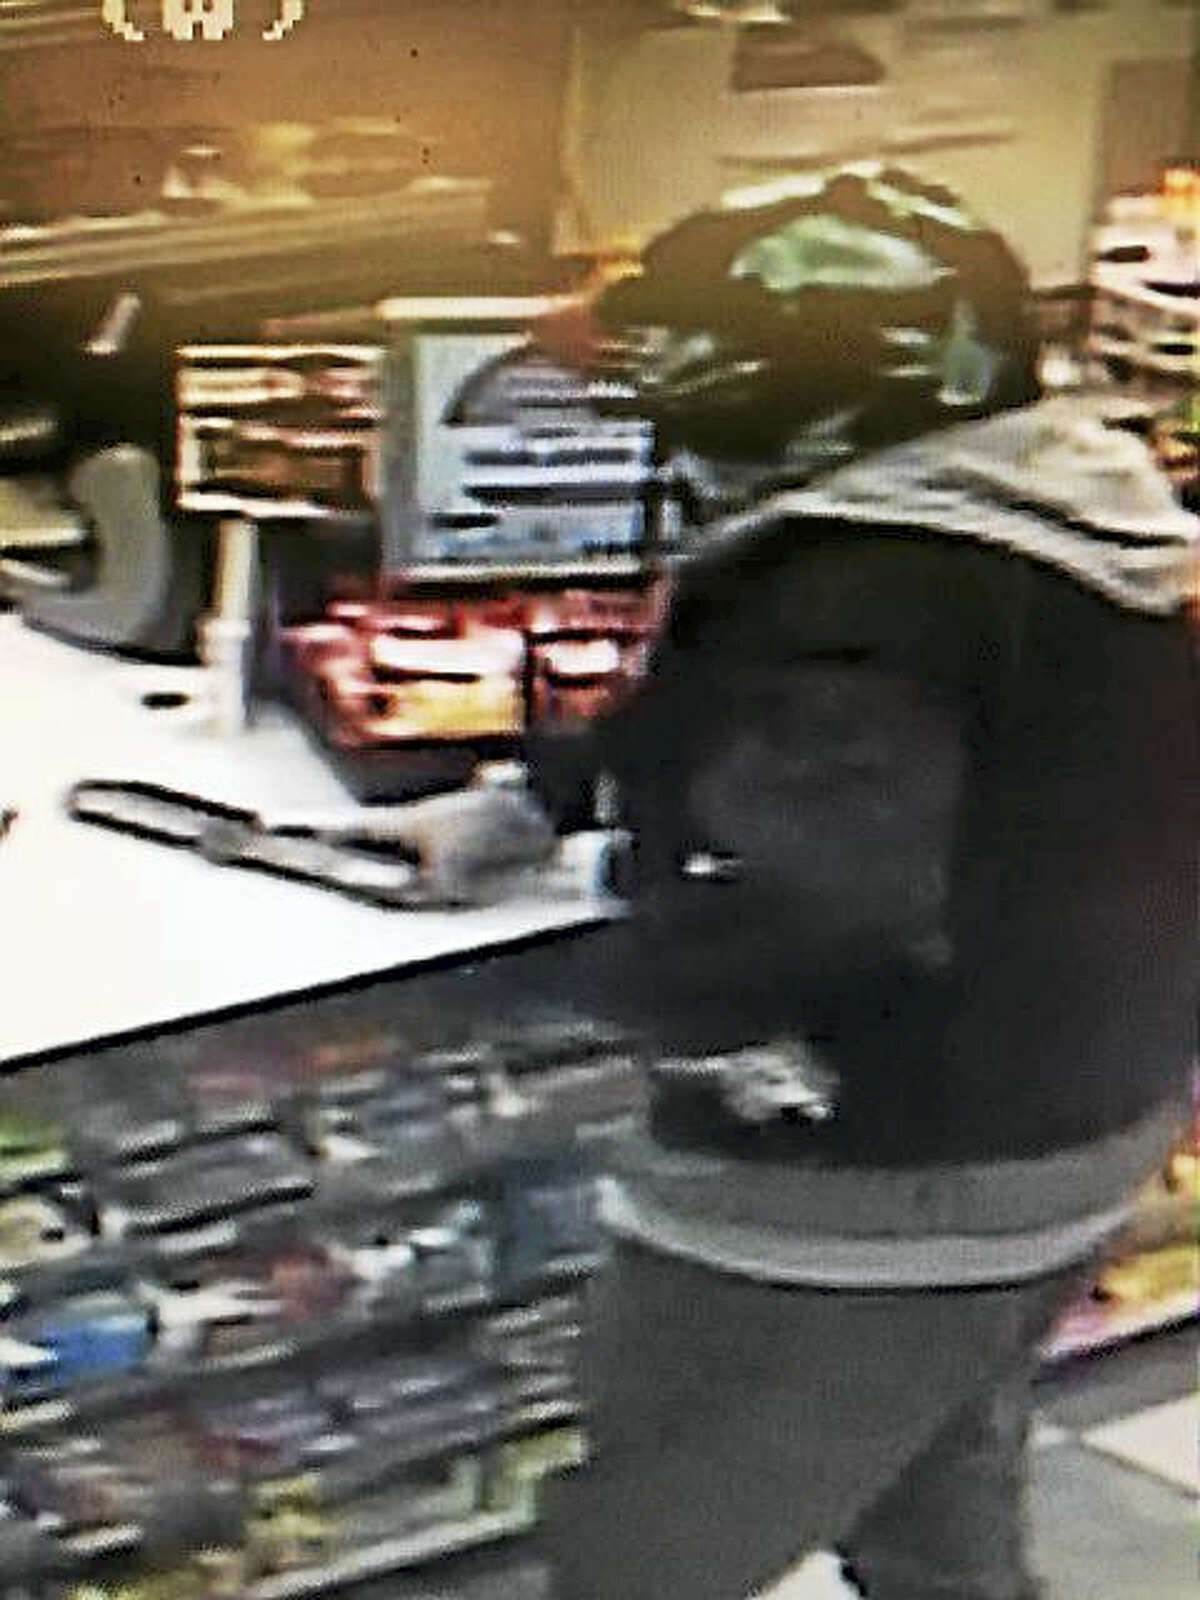 Suspect in store robbery